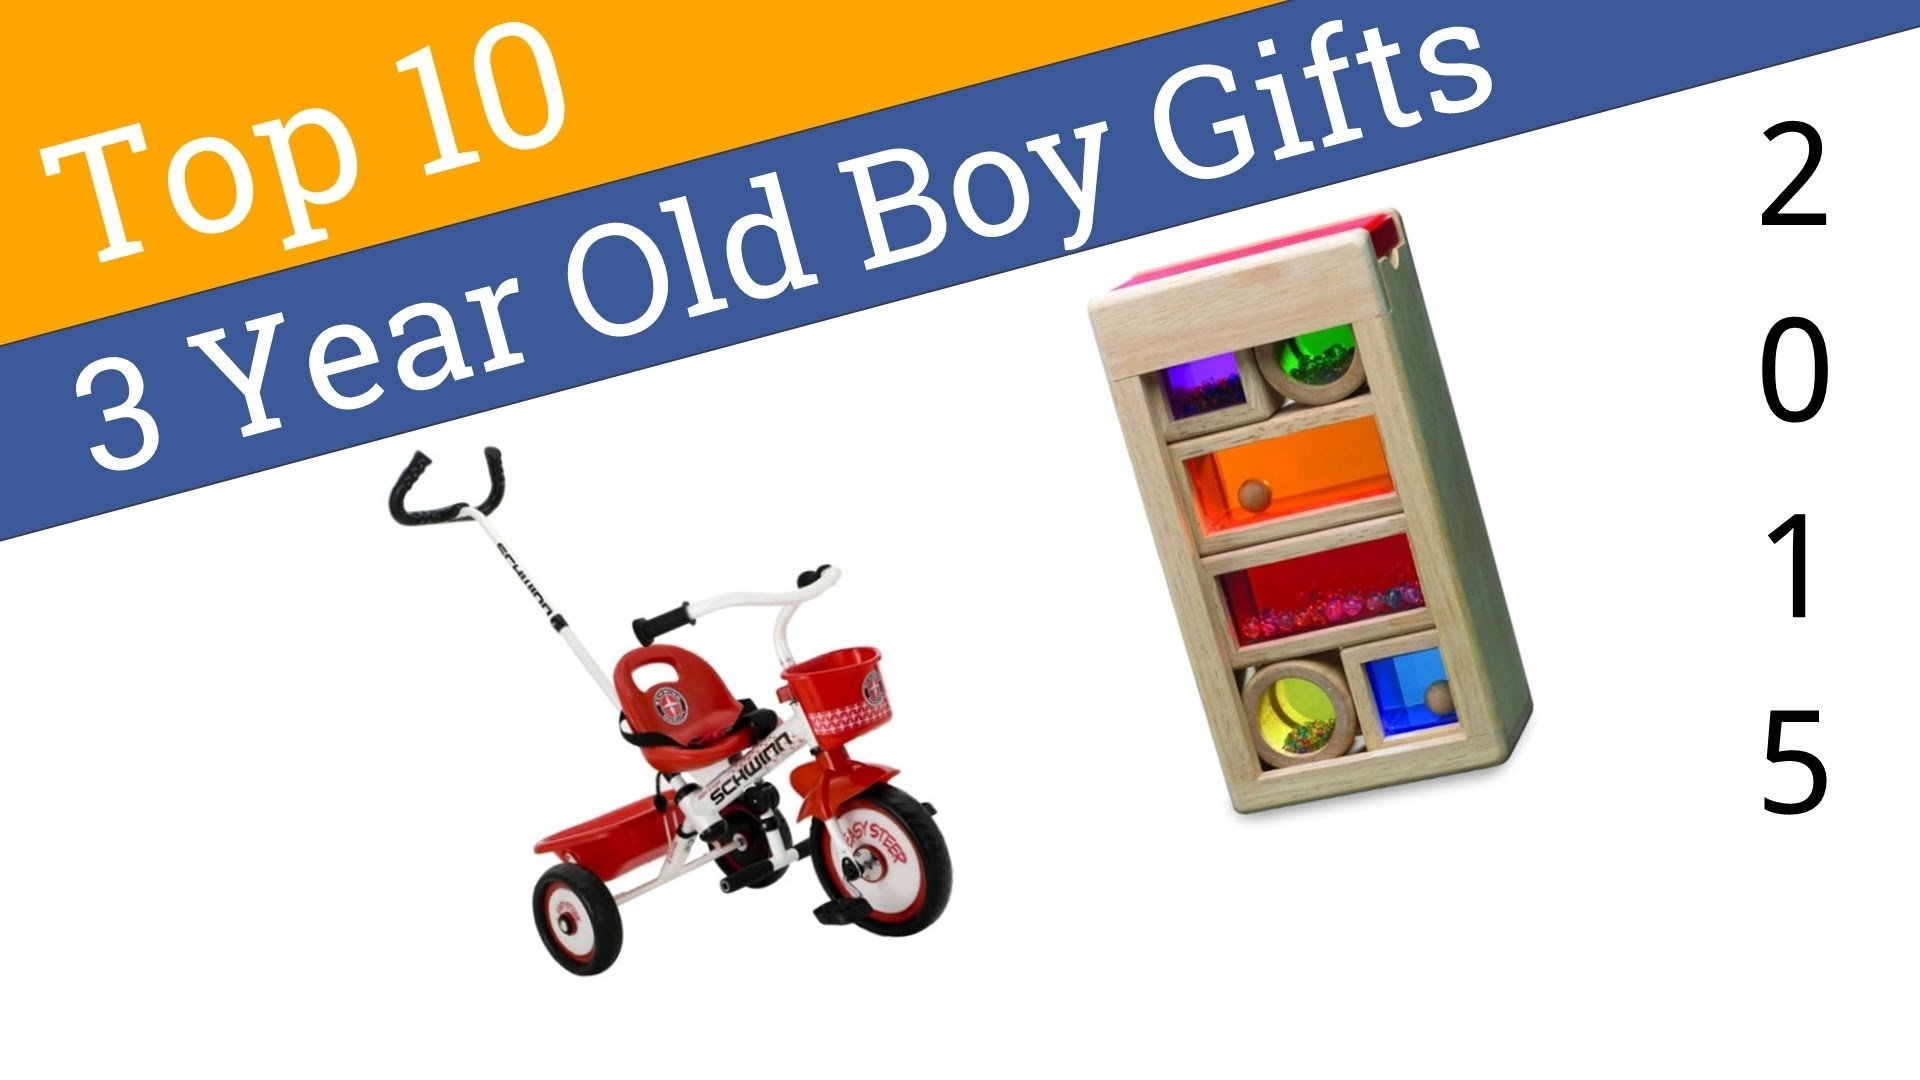 10 Stunning Gift Idea For 3 Year Old Boy 10 best 3 year old boy gifts 2015 youtube 2022